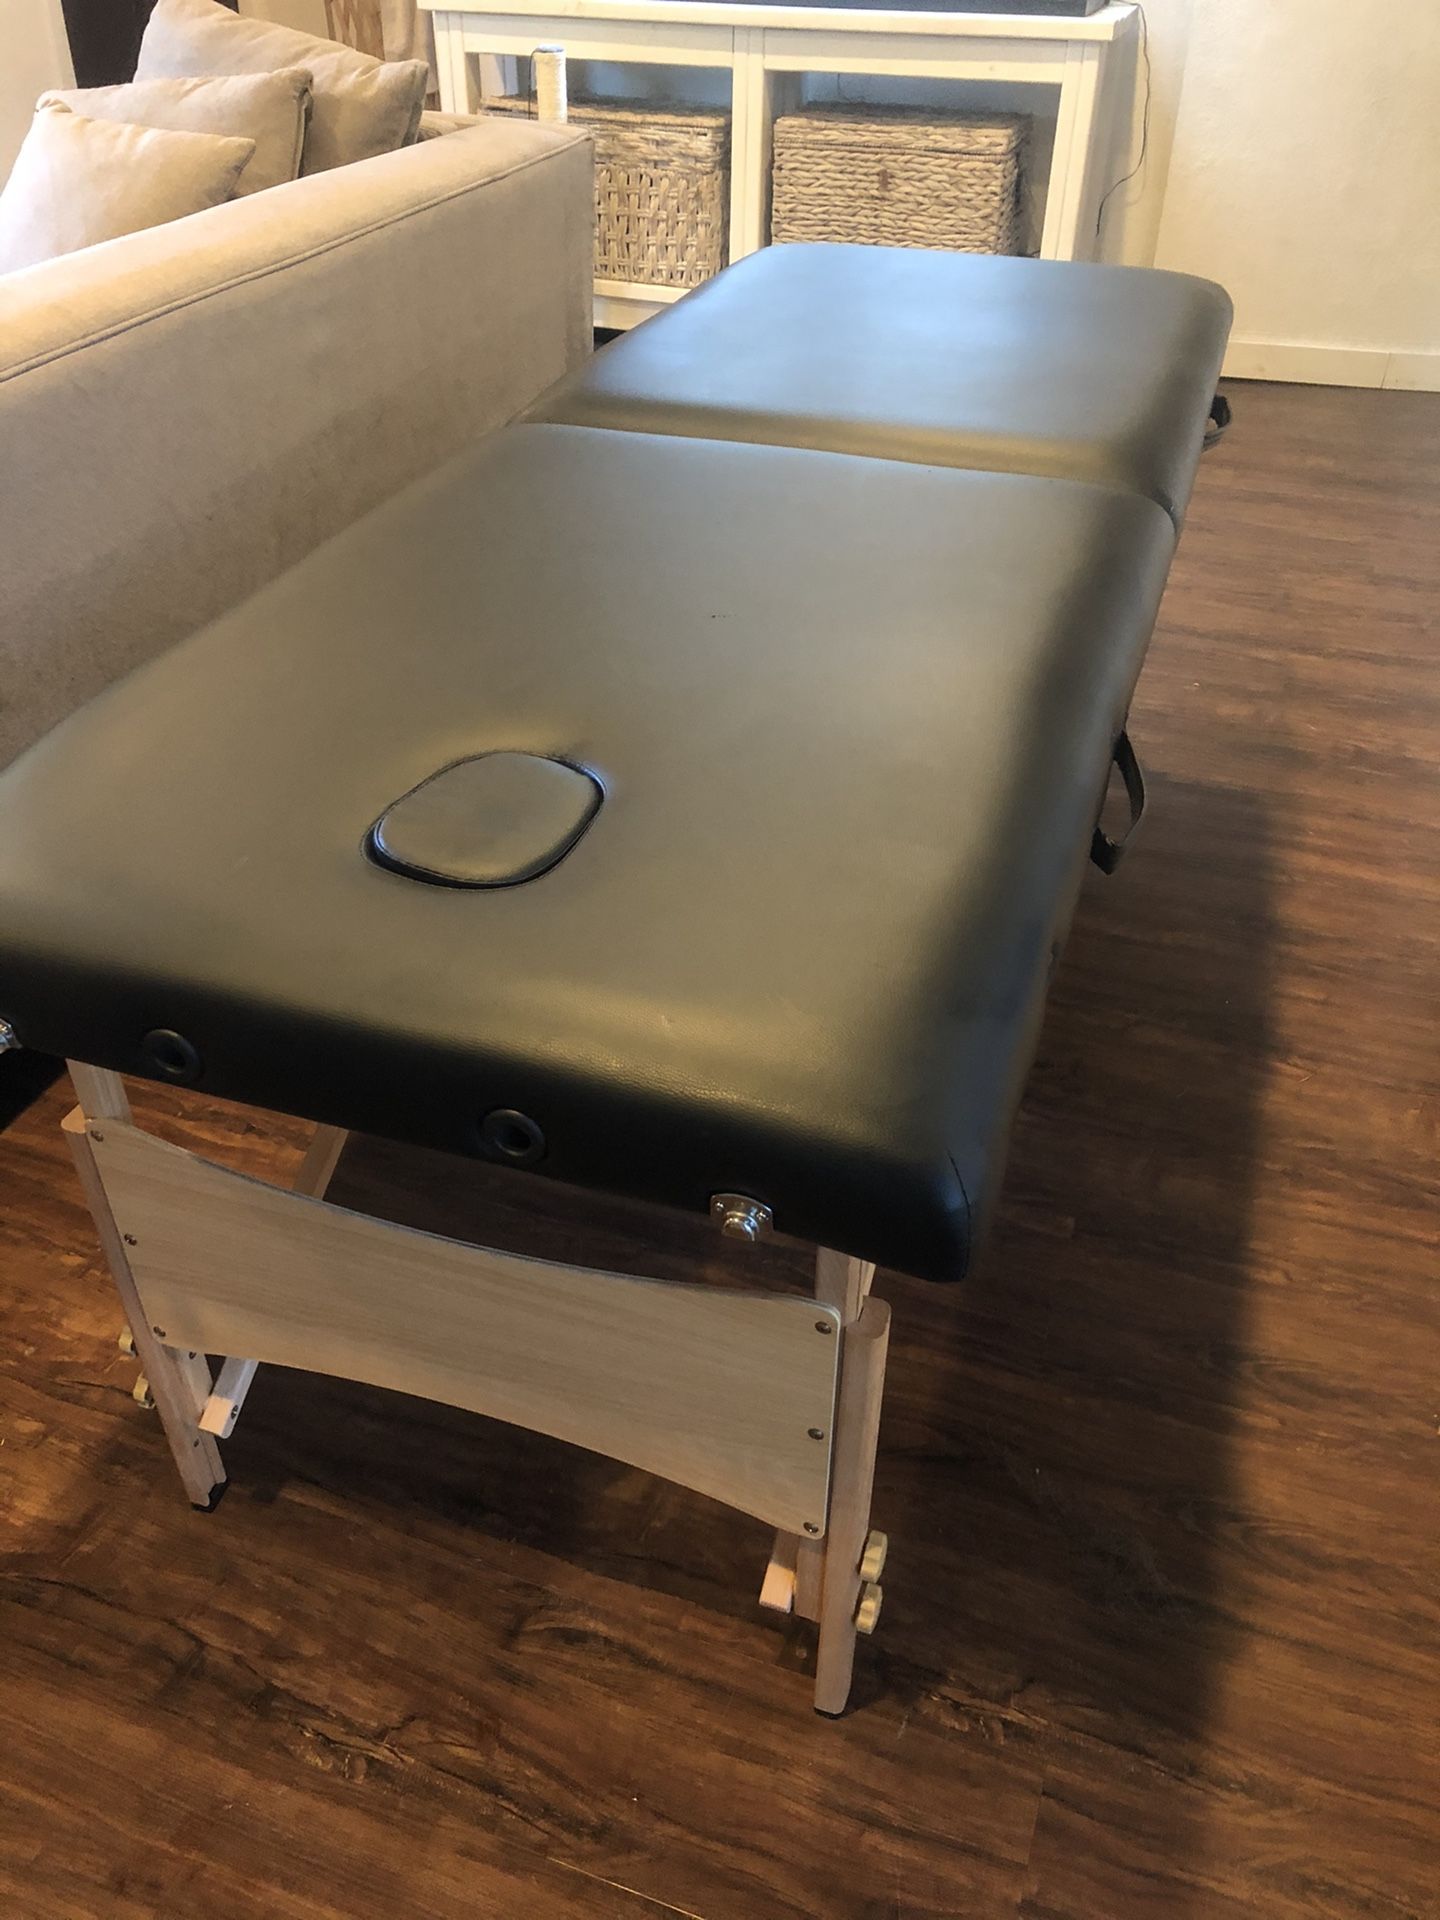 Portable massage table 28” wide and 73” long great condition